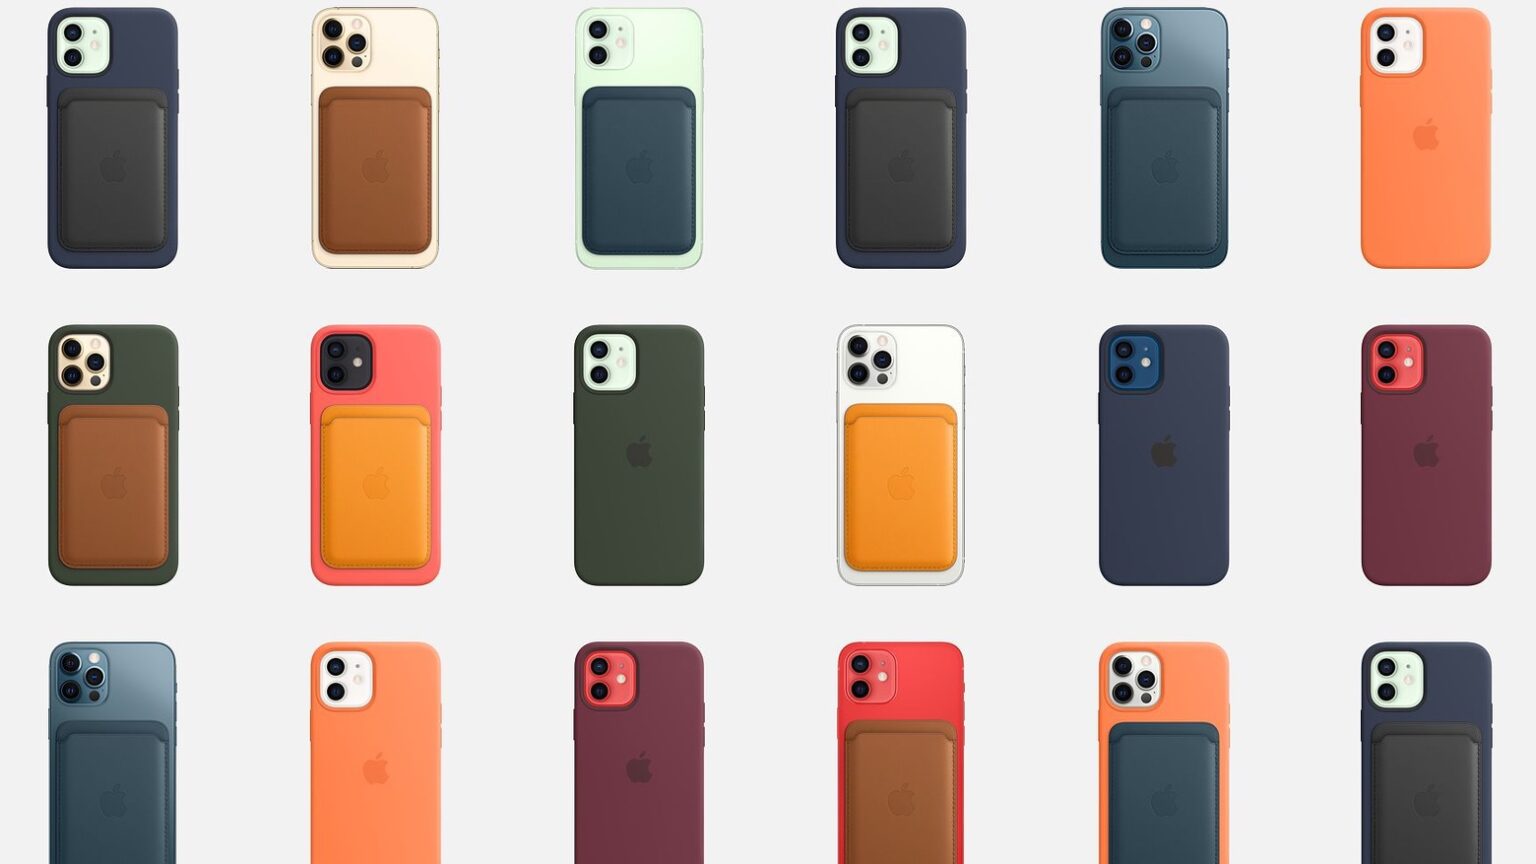 Apple plans several iPhone 12 cases, all MagSafe compatible.